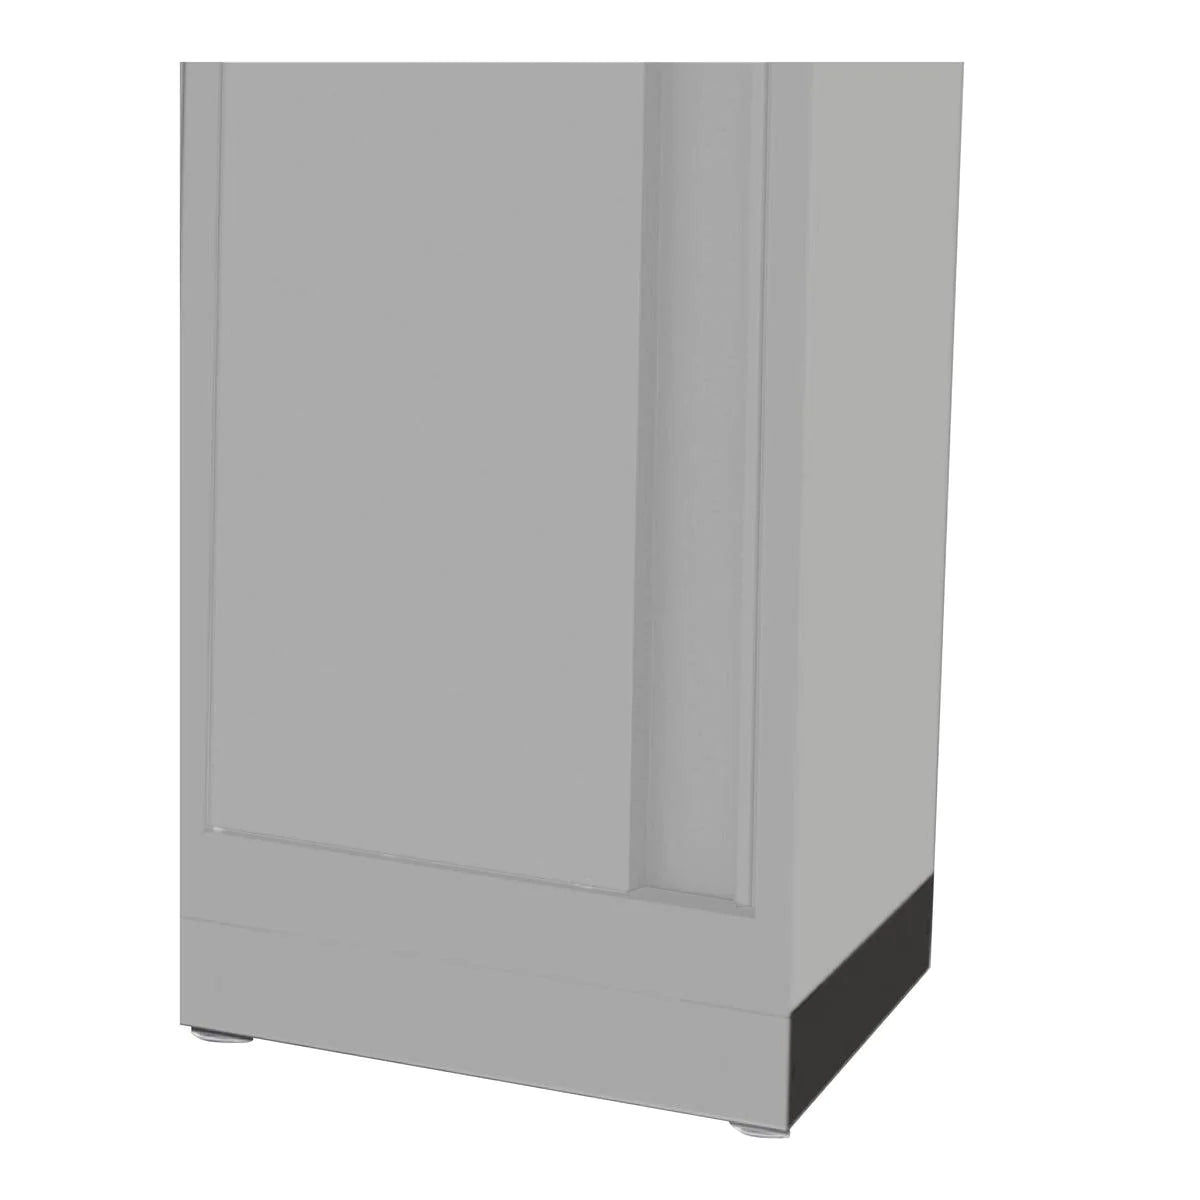 Bottom Side Panel for Wall Cabinet, Dark Grey 19-11/16" D